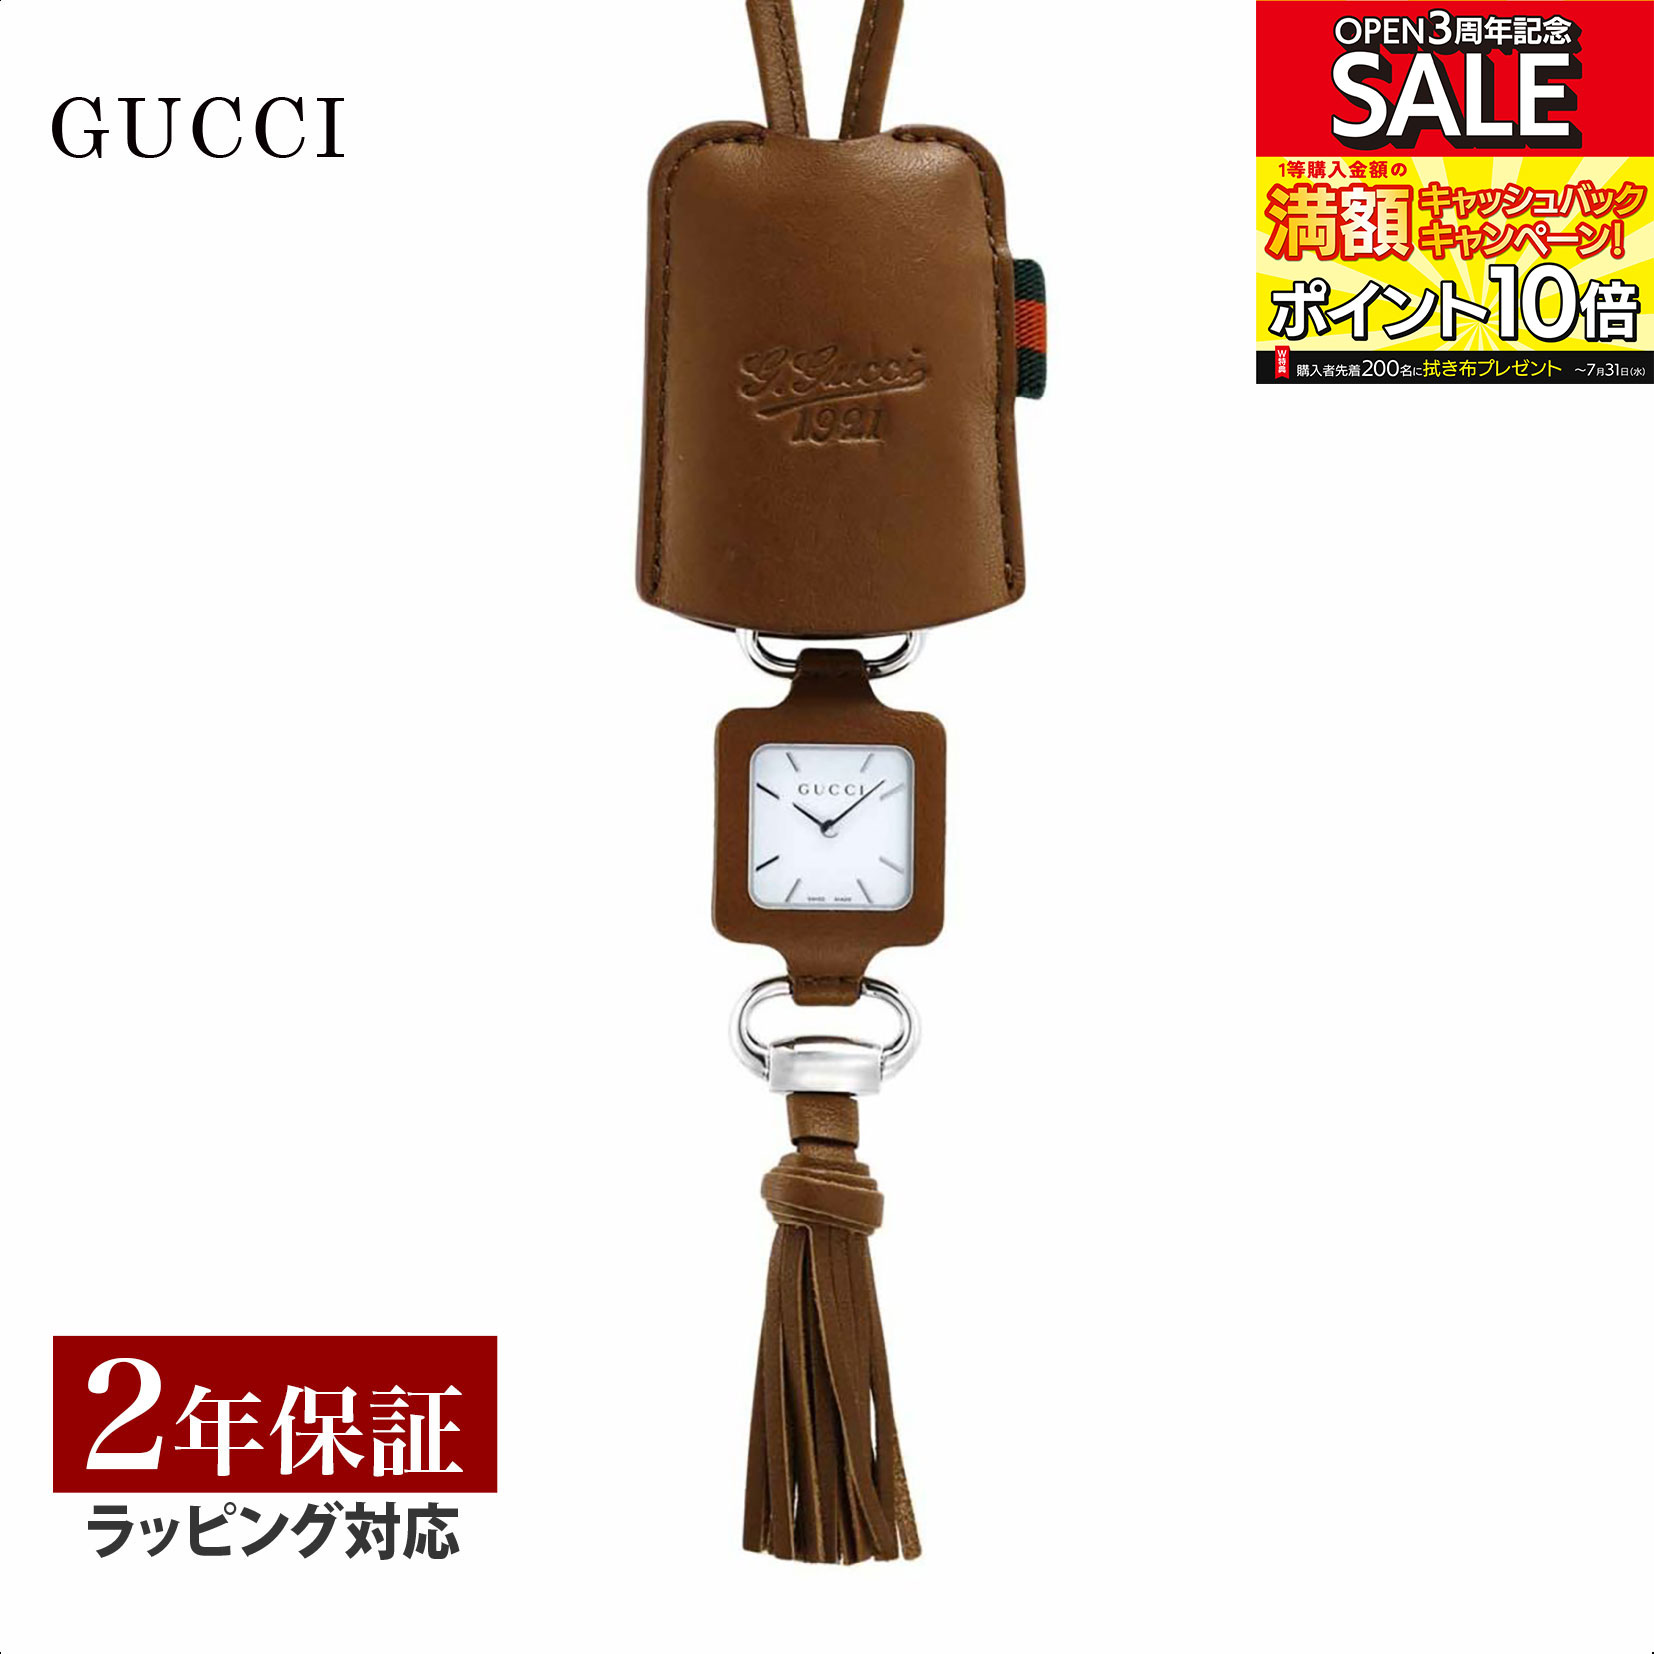 【OUTLET】 グッチ GUCCI メンズ レディ